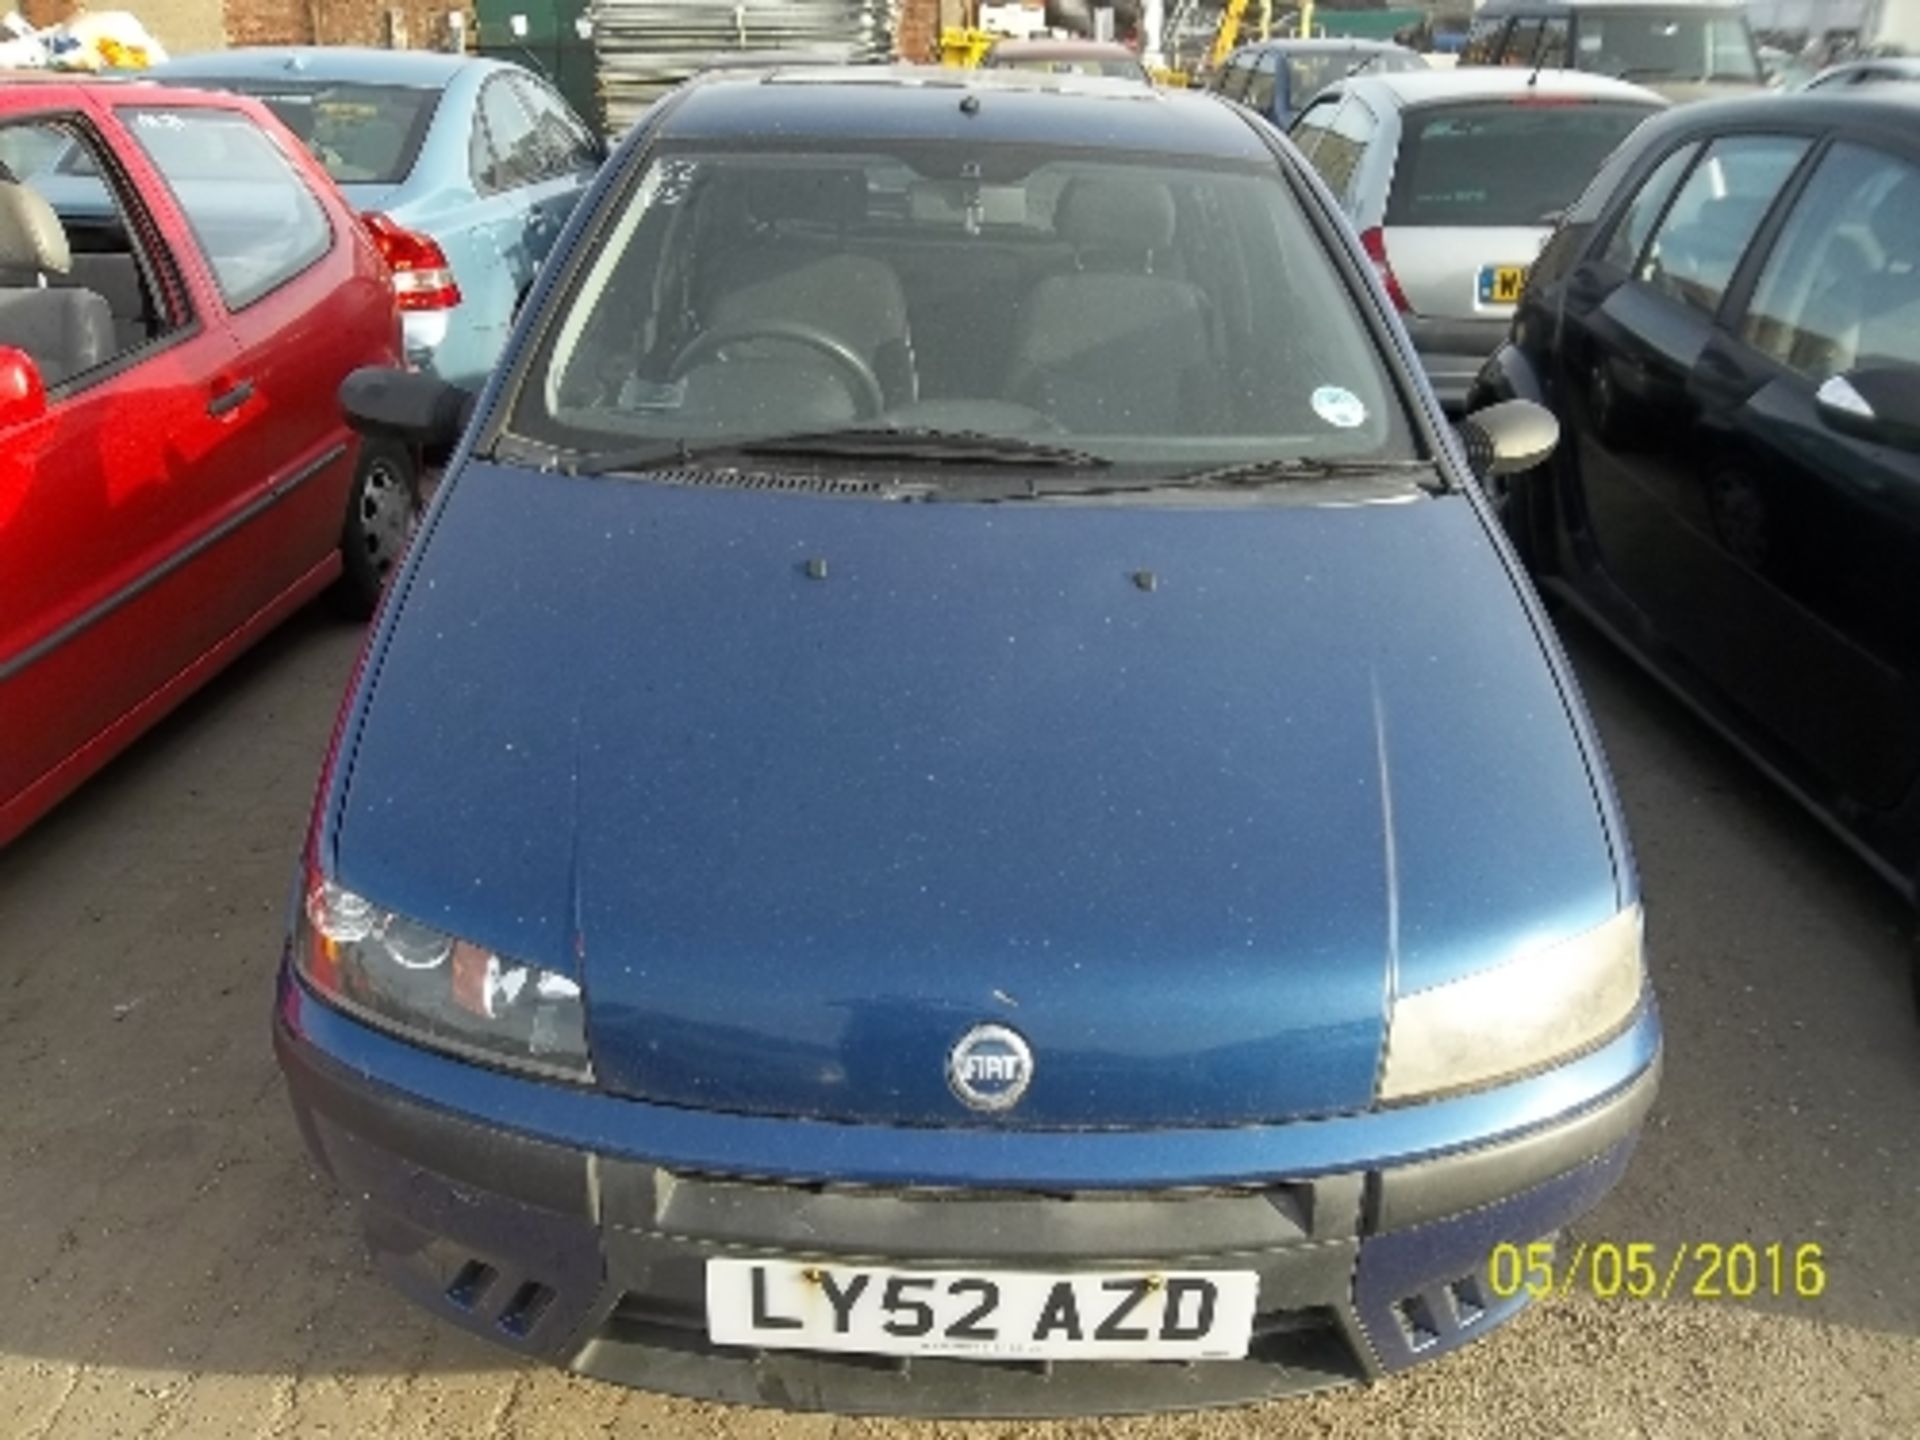 Fiat Punto Active Sport - LY52 AZD Date of Registration: 06.11.2002 1242cc, petrol, manual, blue